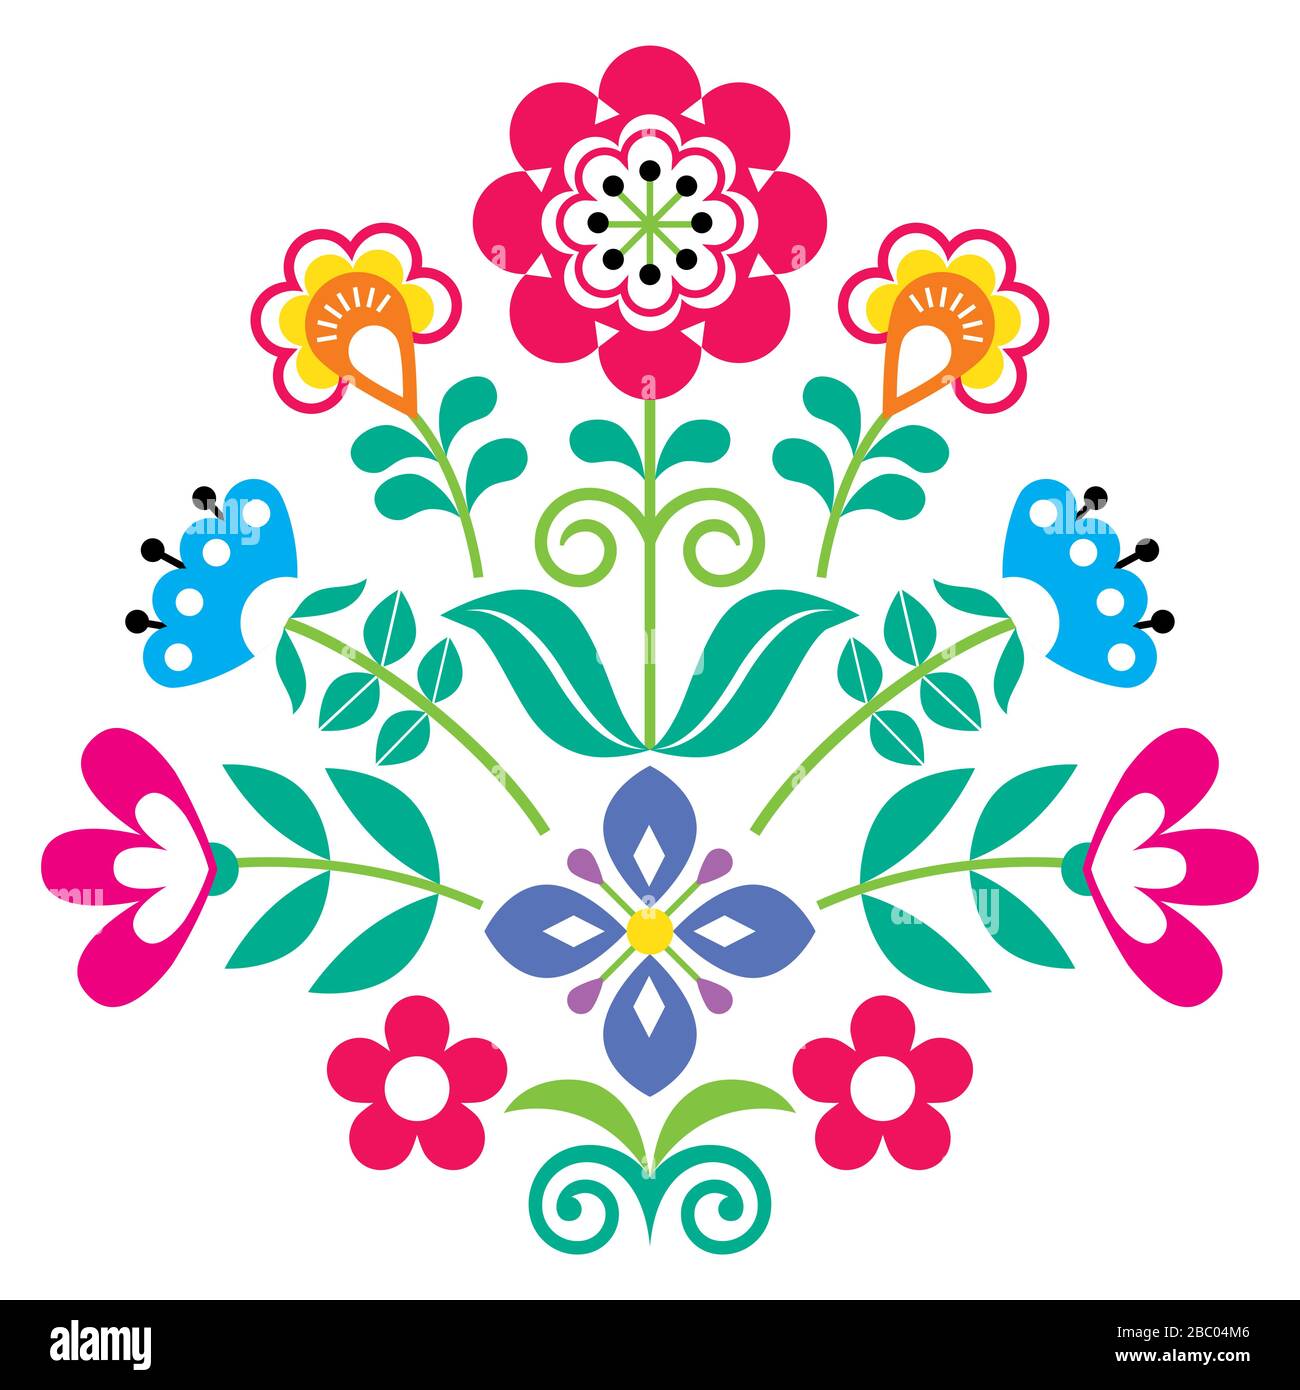 Scandinavian bear folk art vector round pattern with flowers and wreath, Nordic floral greeting card or invitation inspired by traditional embroidery Stock Vector